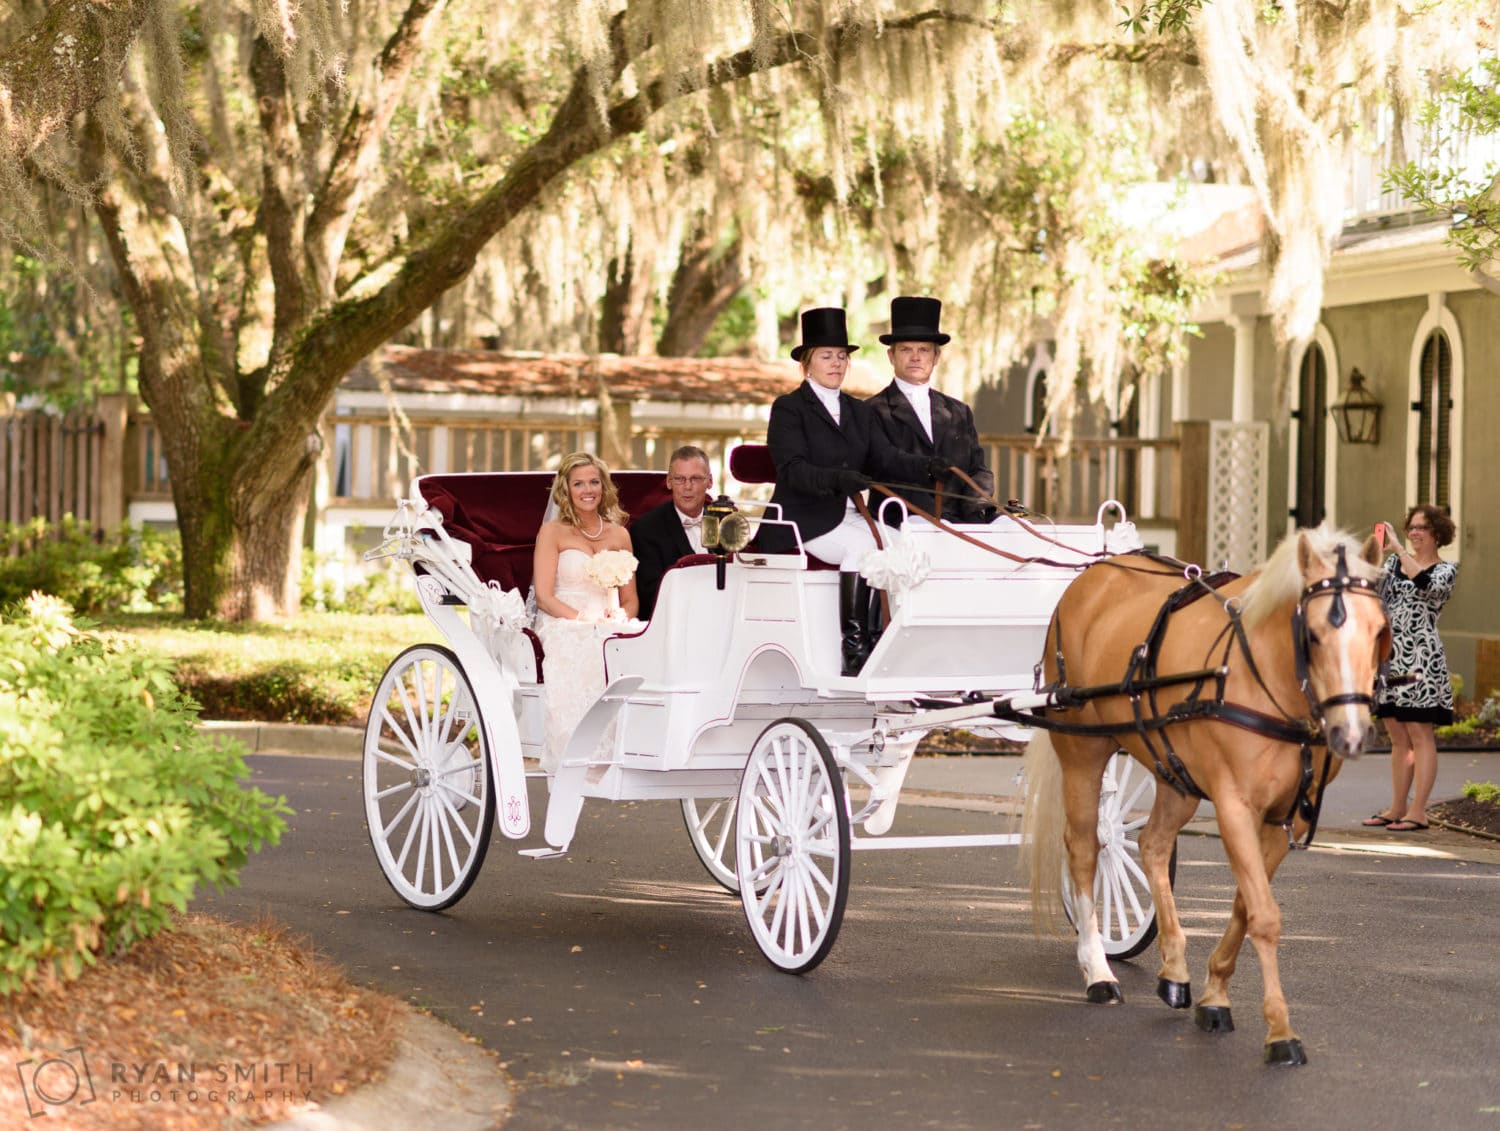 Bride and father arriving on horse drawn carriage to ceremony - Wachesaw Plantation